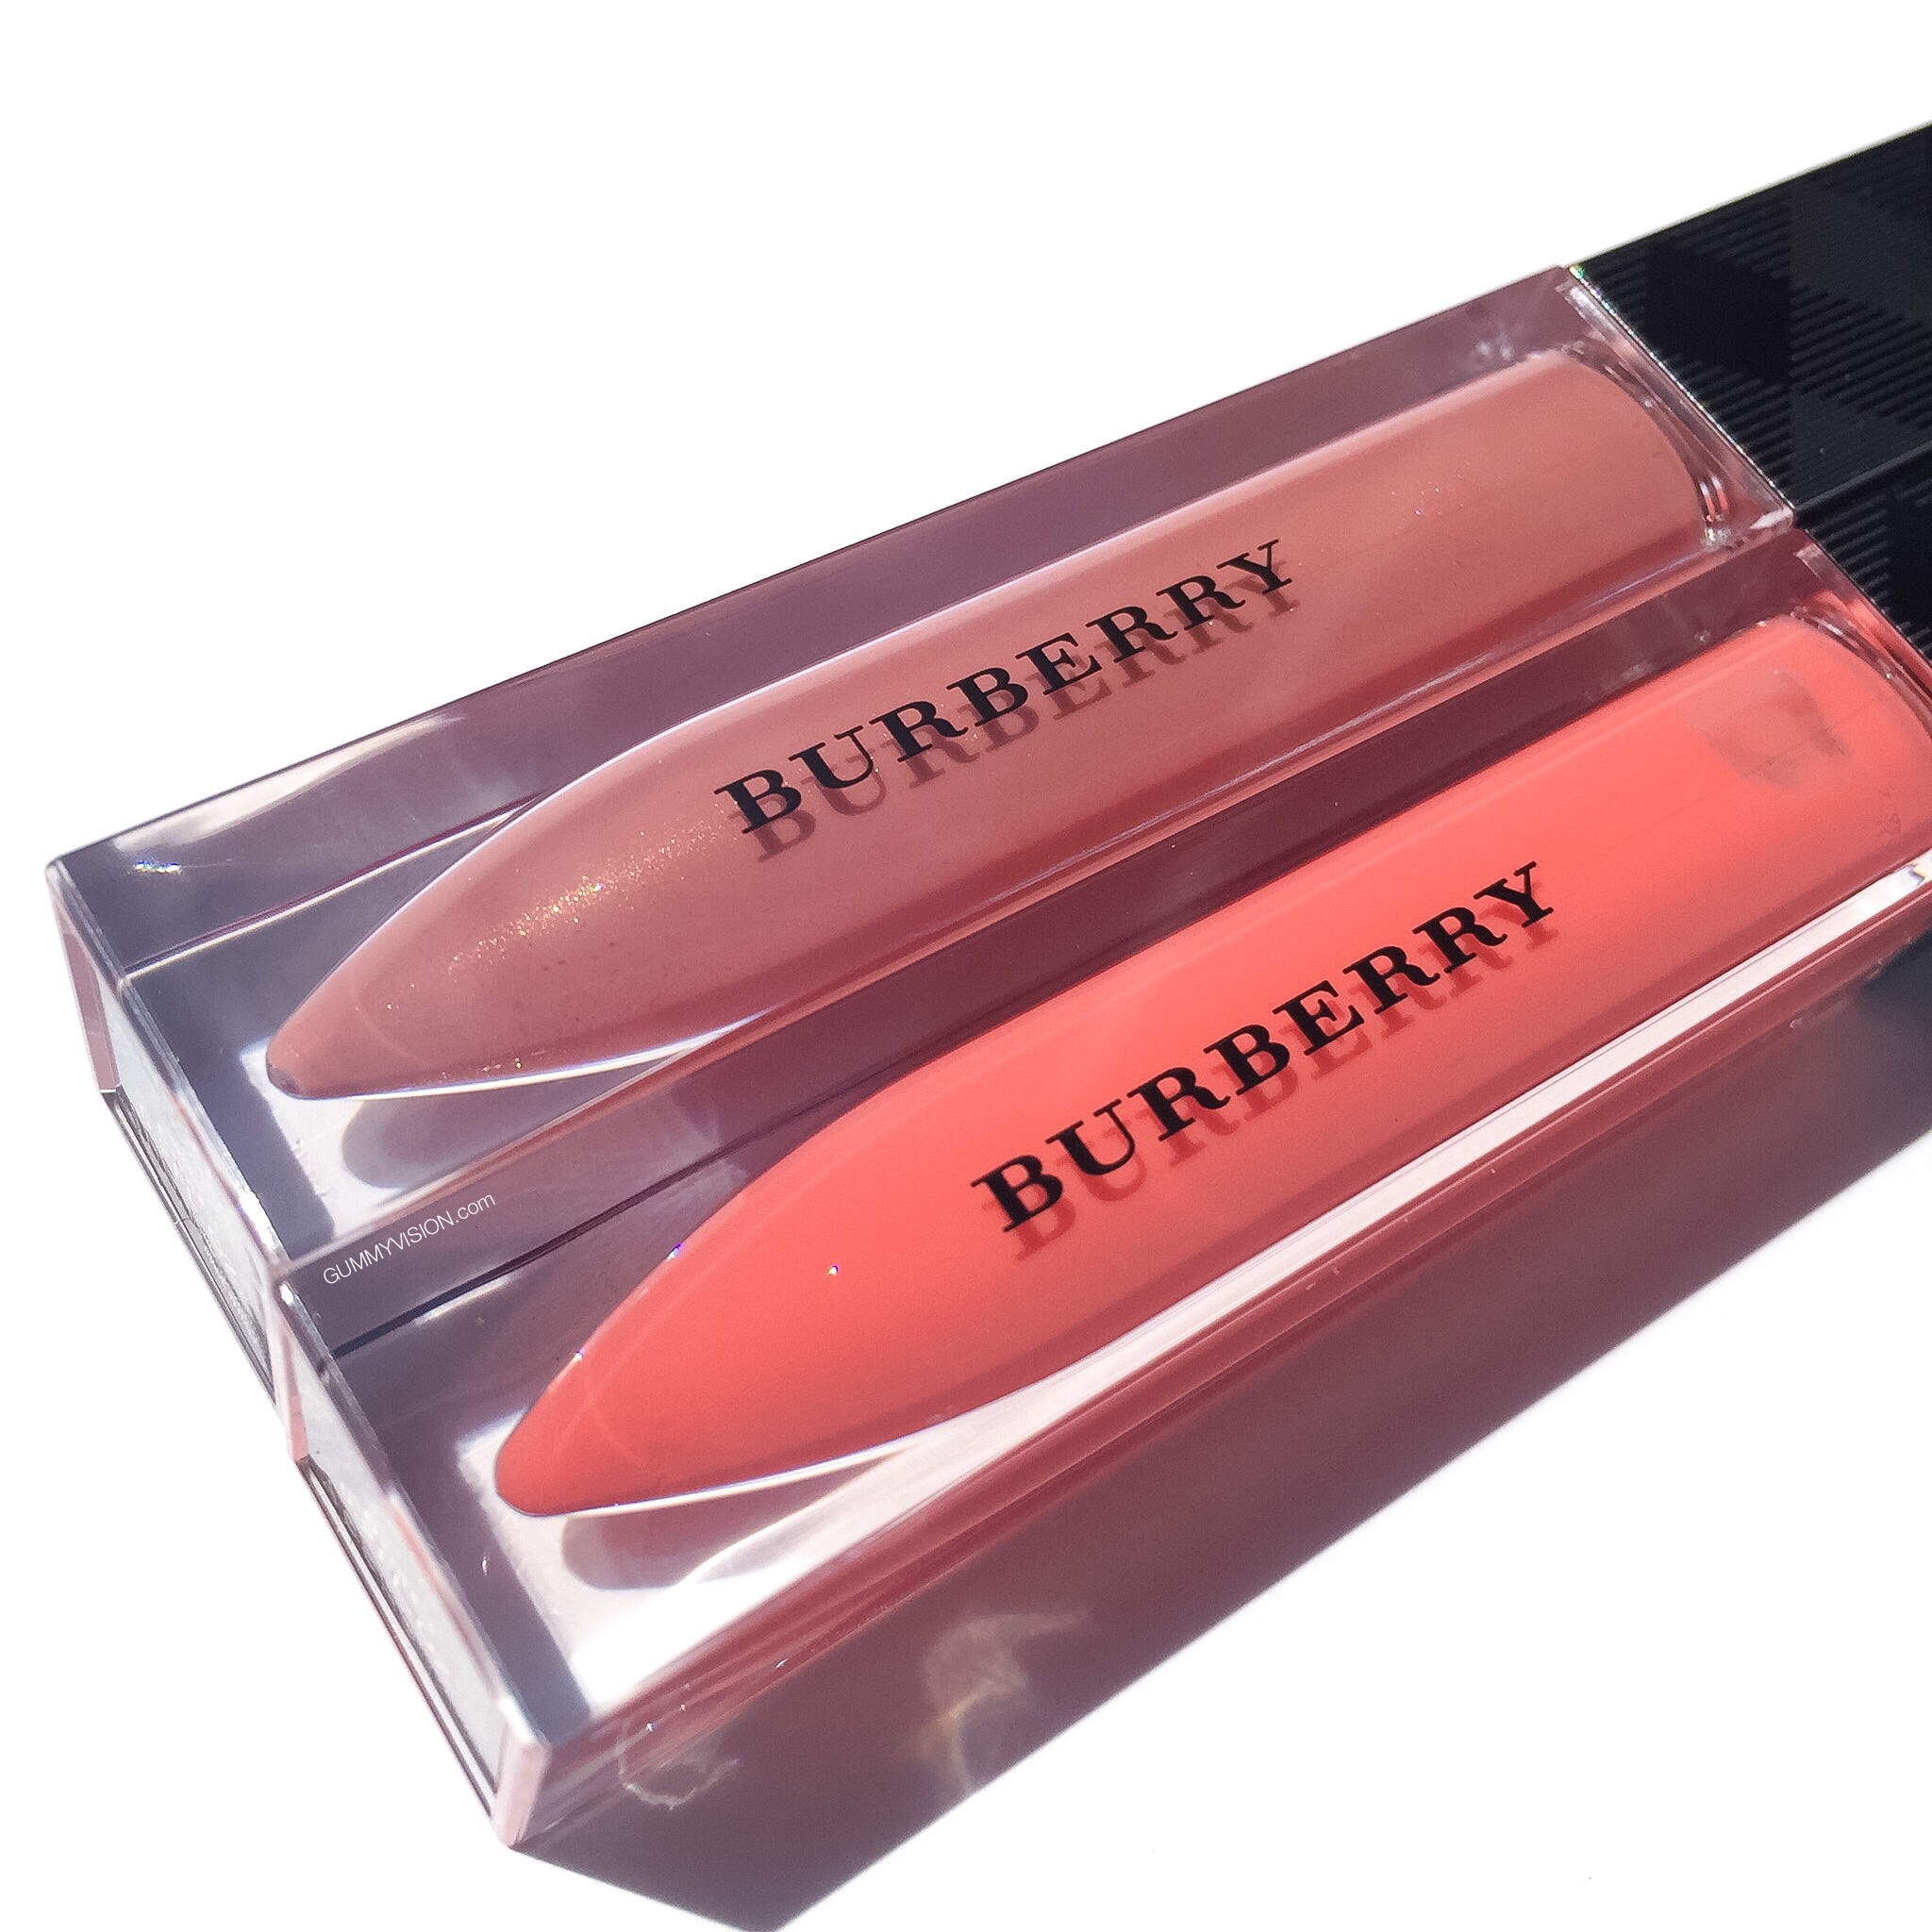 Burberry Kisses Lip Gloss in Cameo Nude & Melon, Burberry First Kiss Glossy  Lip Balm in Rose Blush — Grey to Z